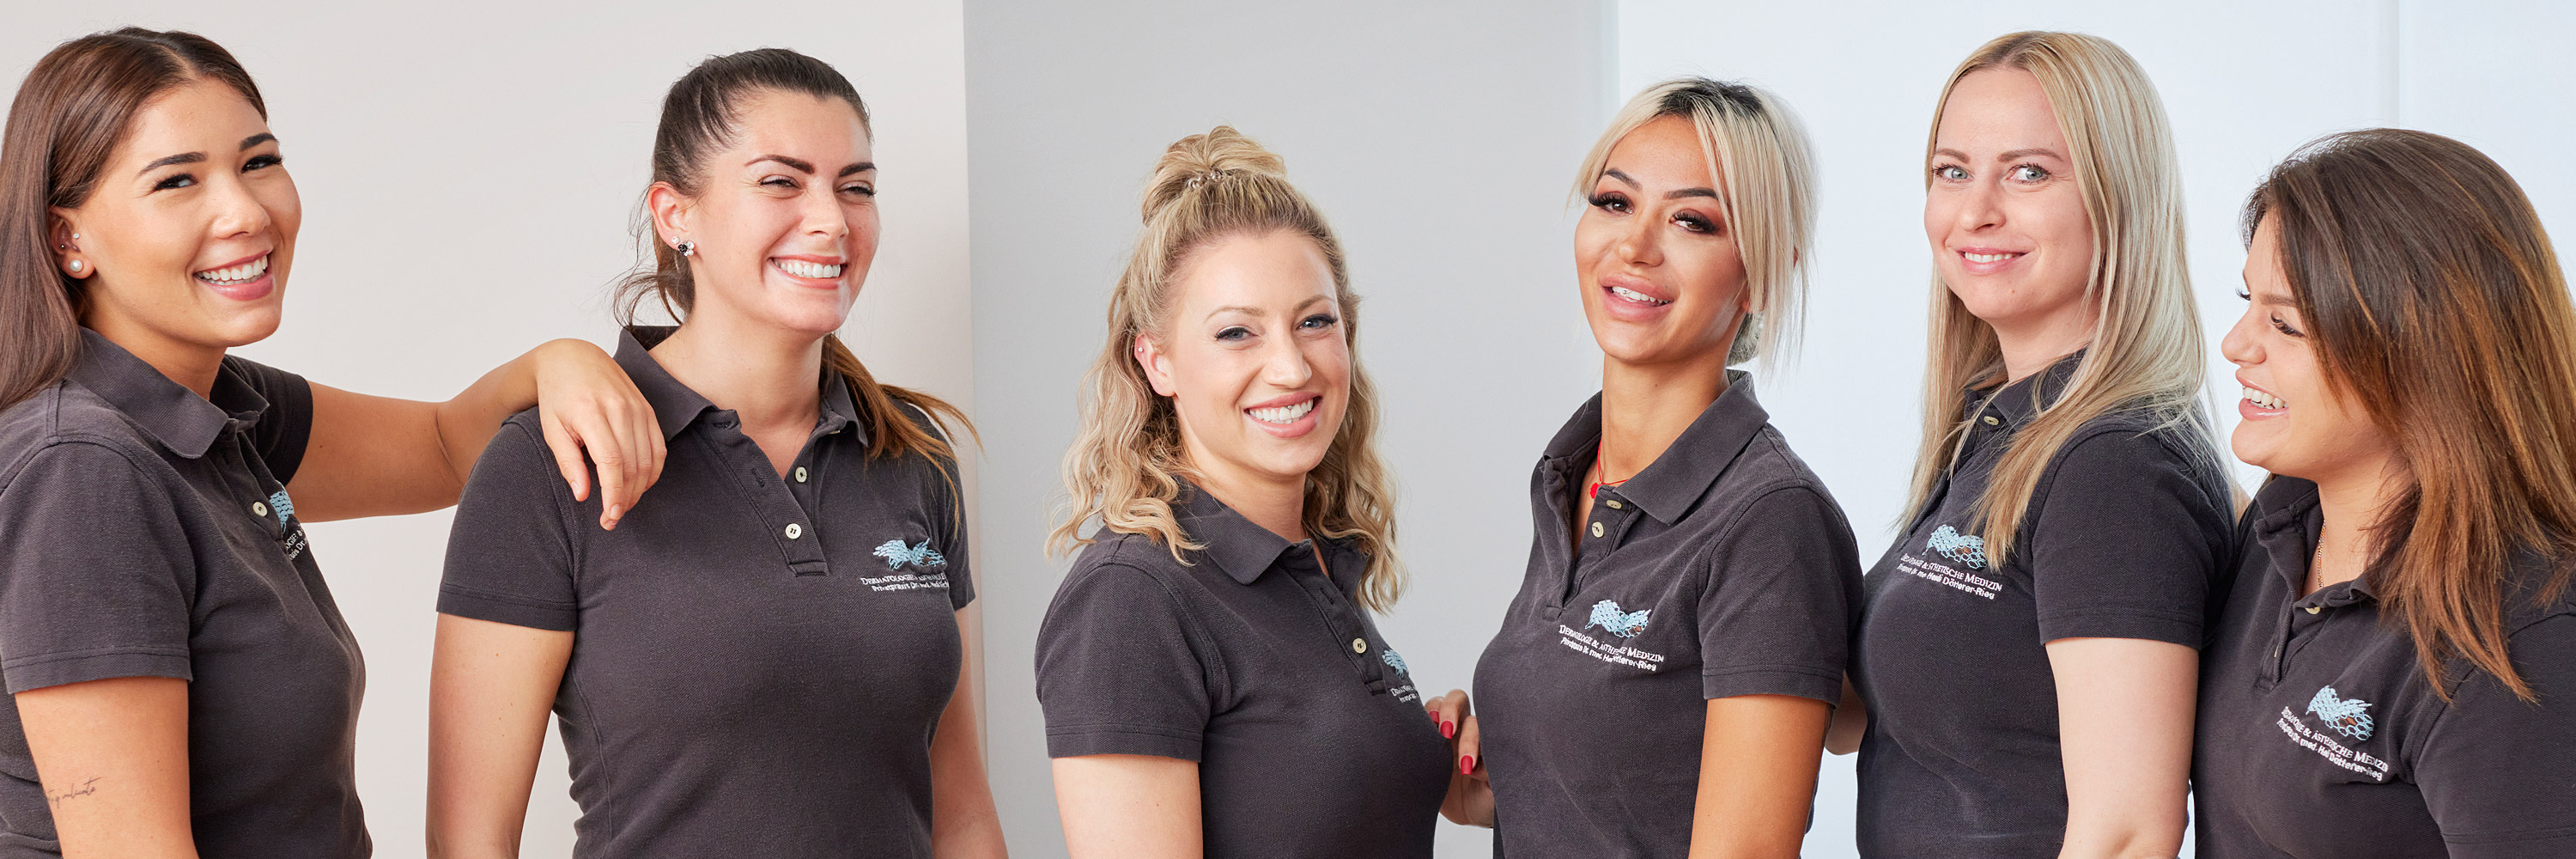 Employee of the specialist practice for dermatology, phlebology and allergology in Frankfurt. Six medical assistants happily stand in front of the camera as a team. They are dressed uniformly and carry the symbol of the dermatology practice.